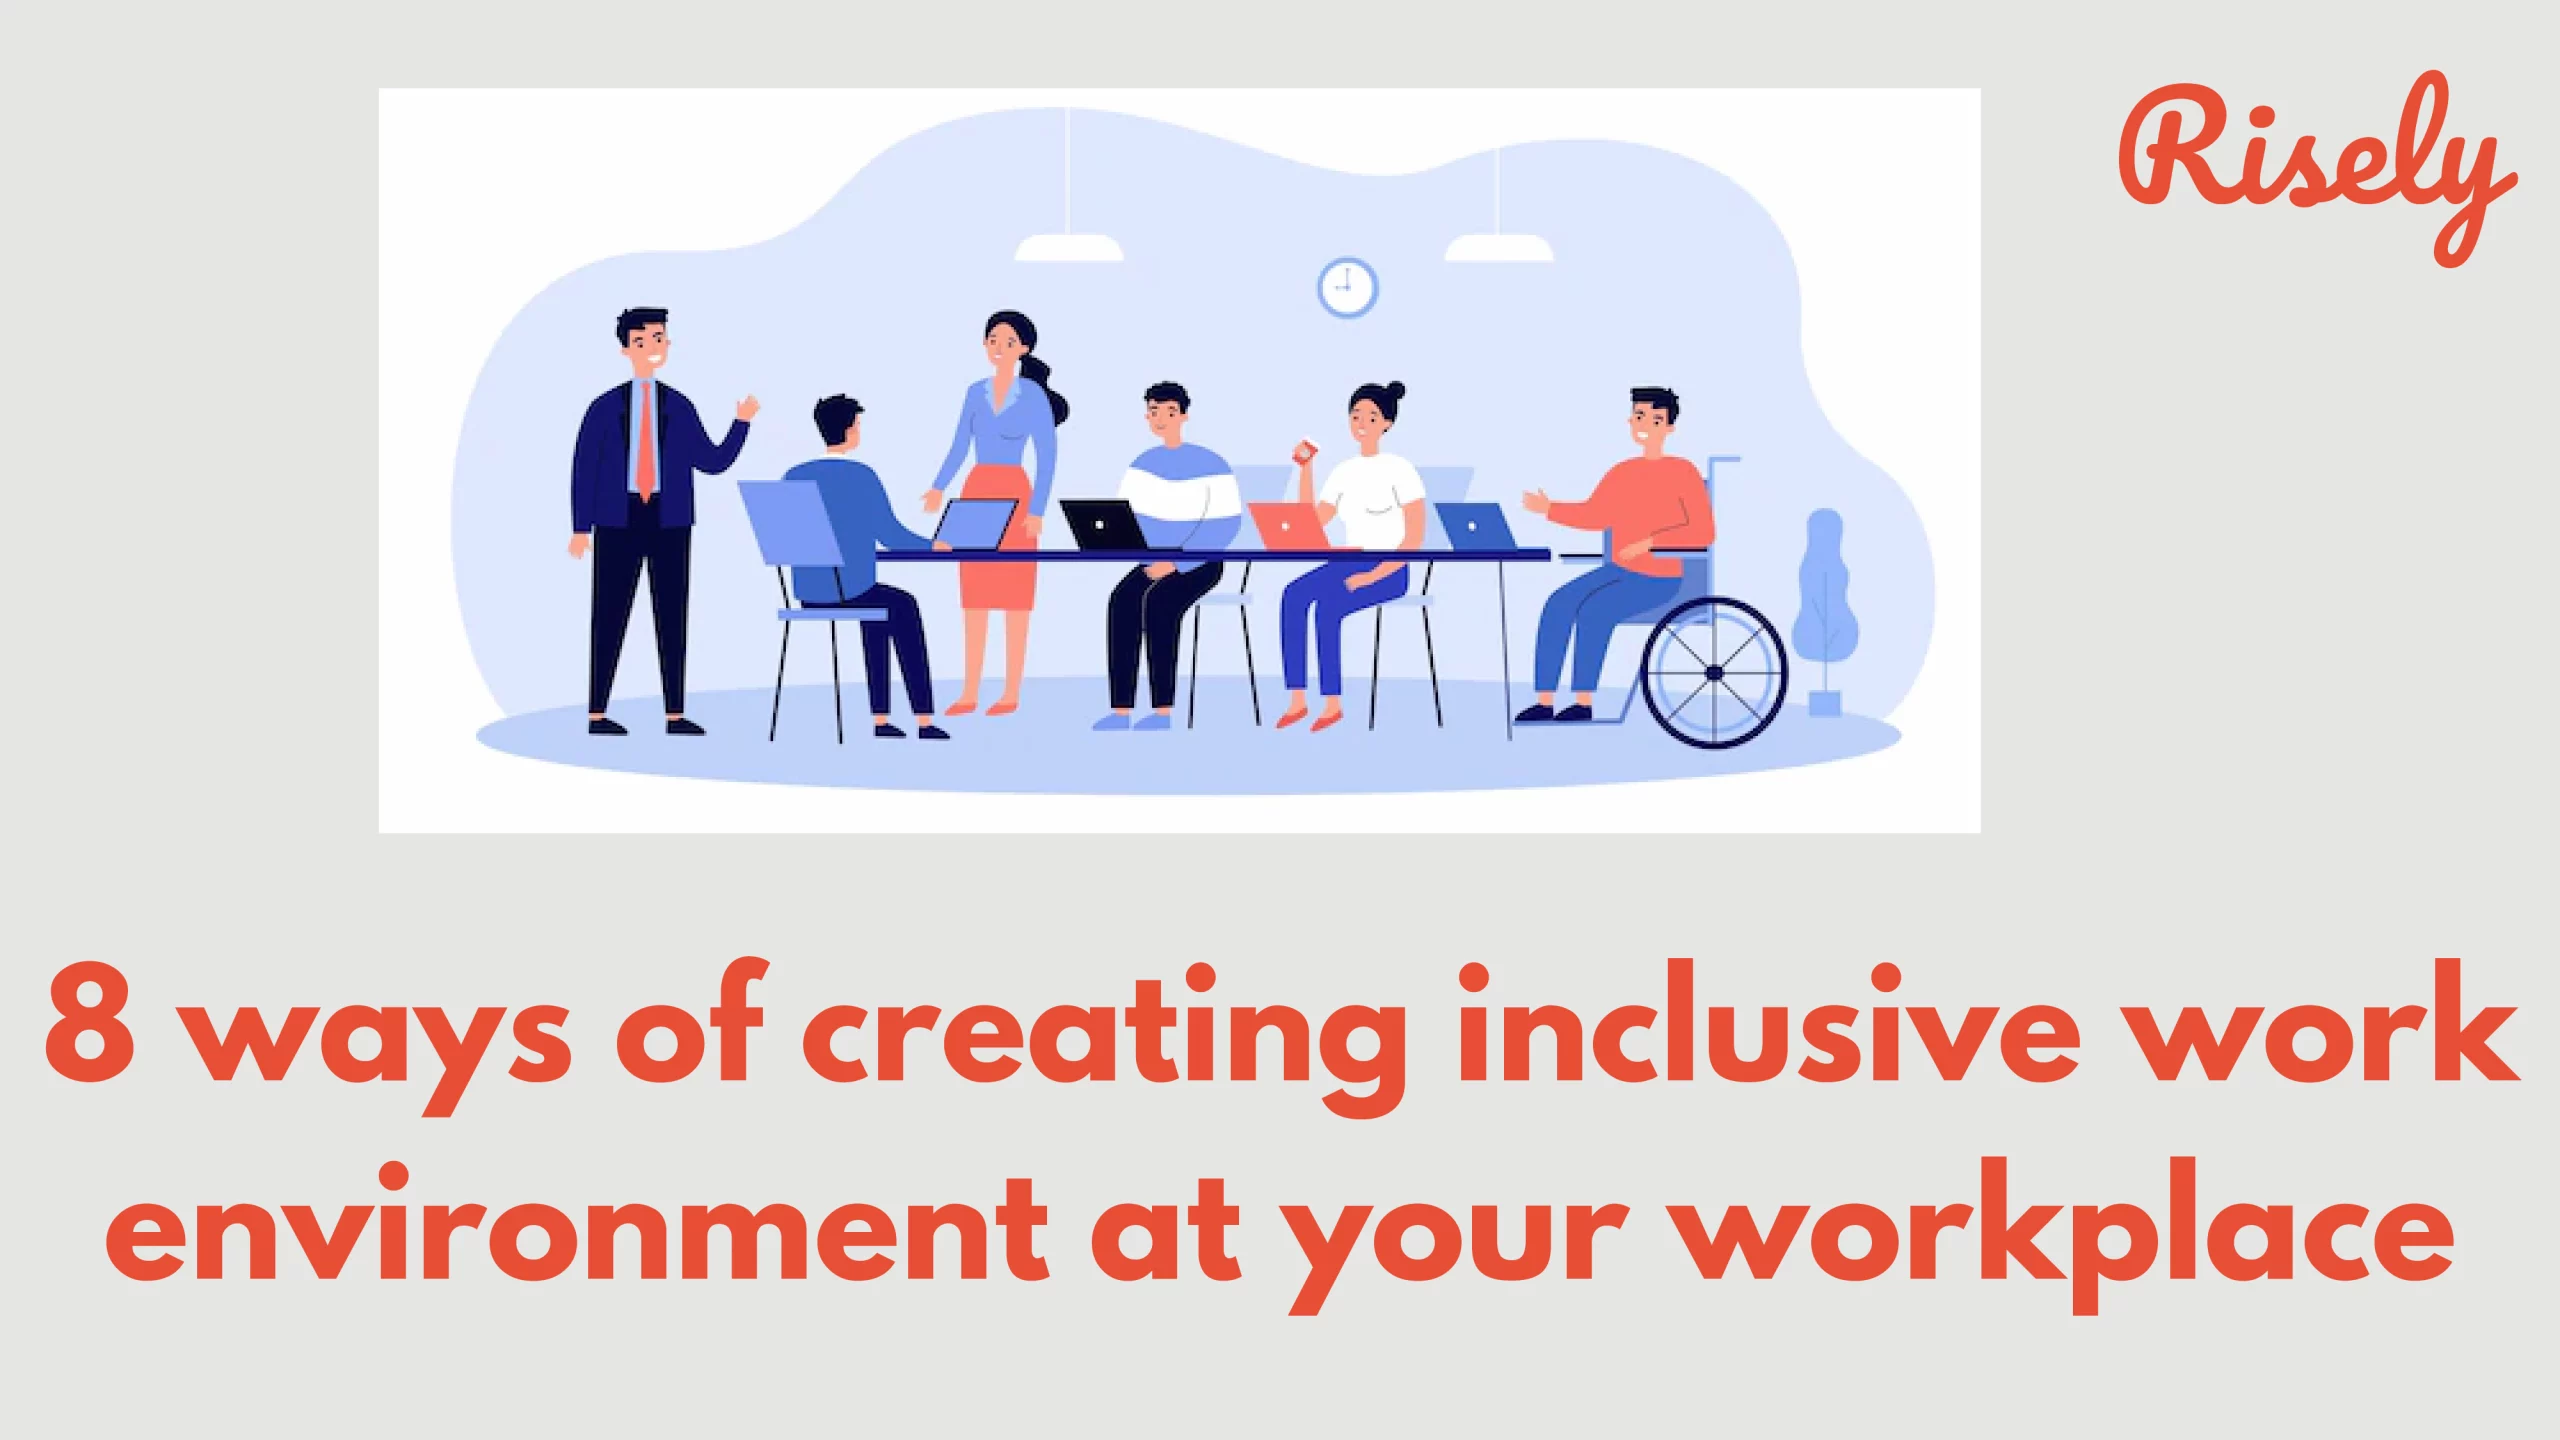 8 ways of creating inclusive work environment at your workplace